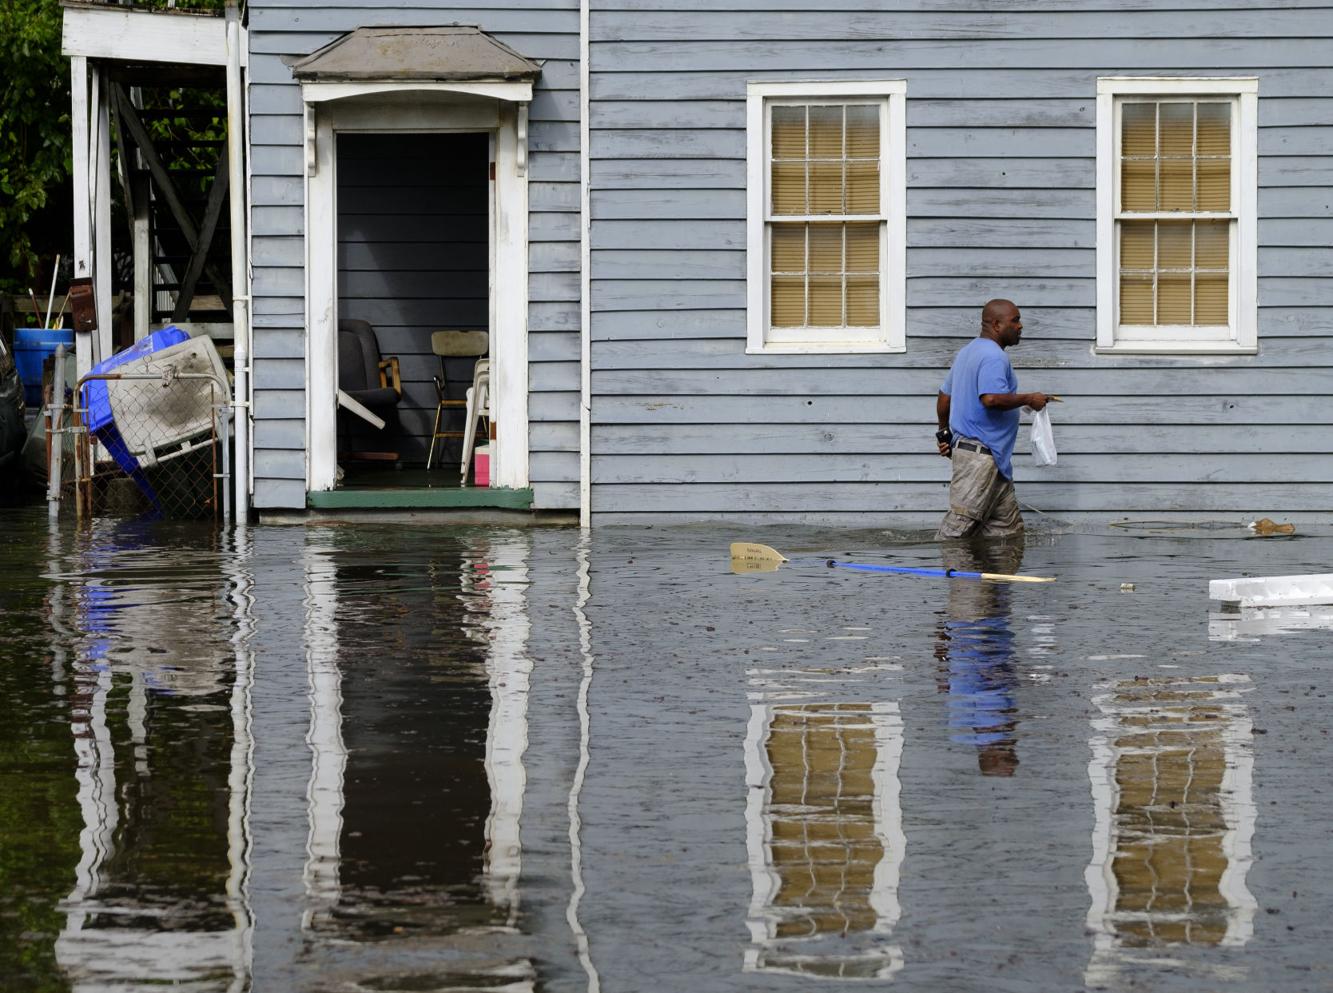 Up To 8 Inches Of Rain Inundates Charleston Area Flooding Roads Cars And Homes News 0986